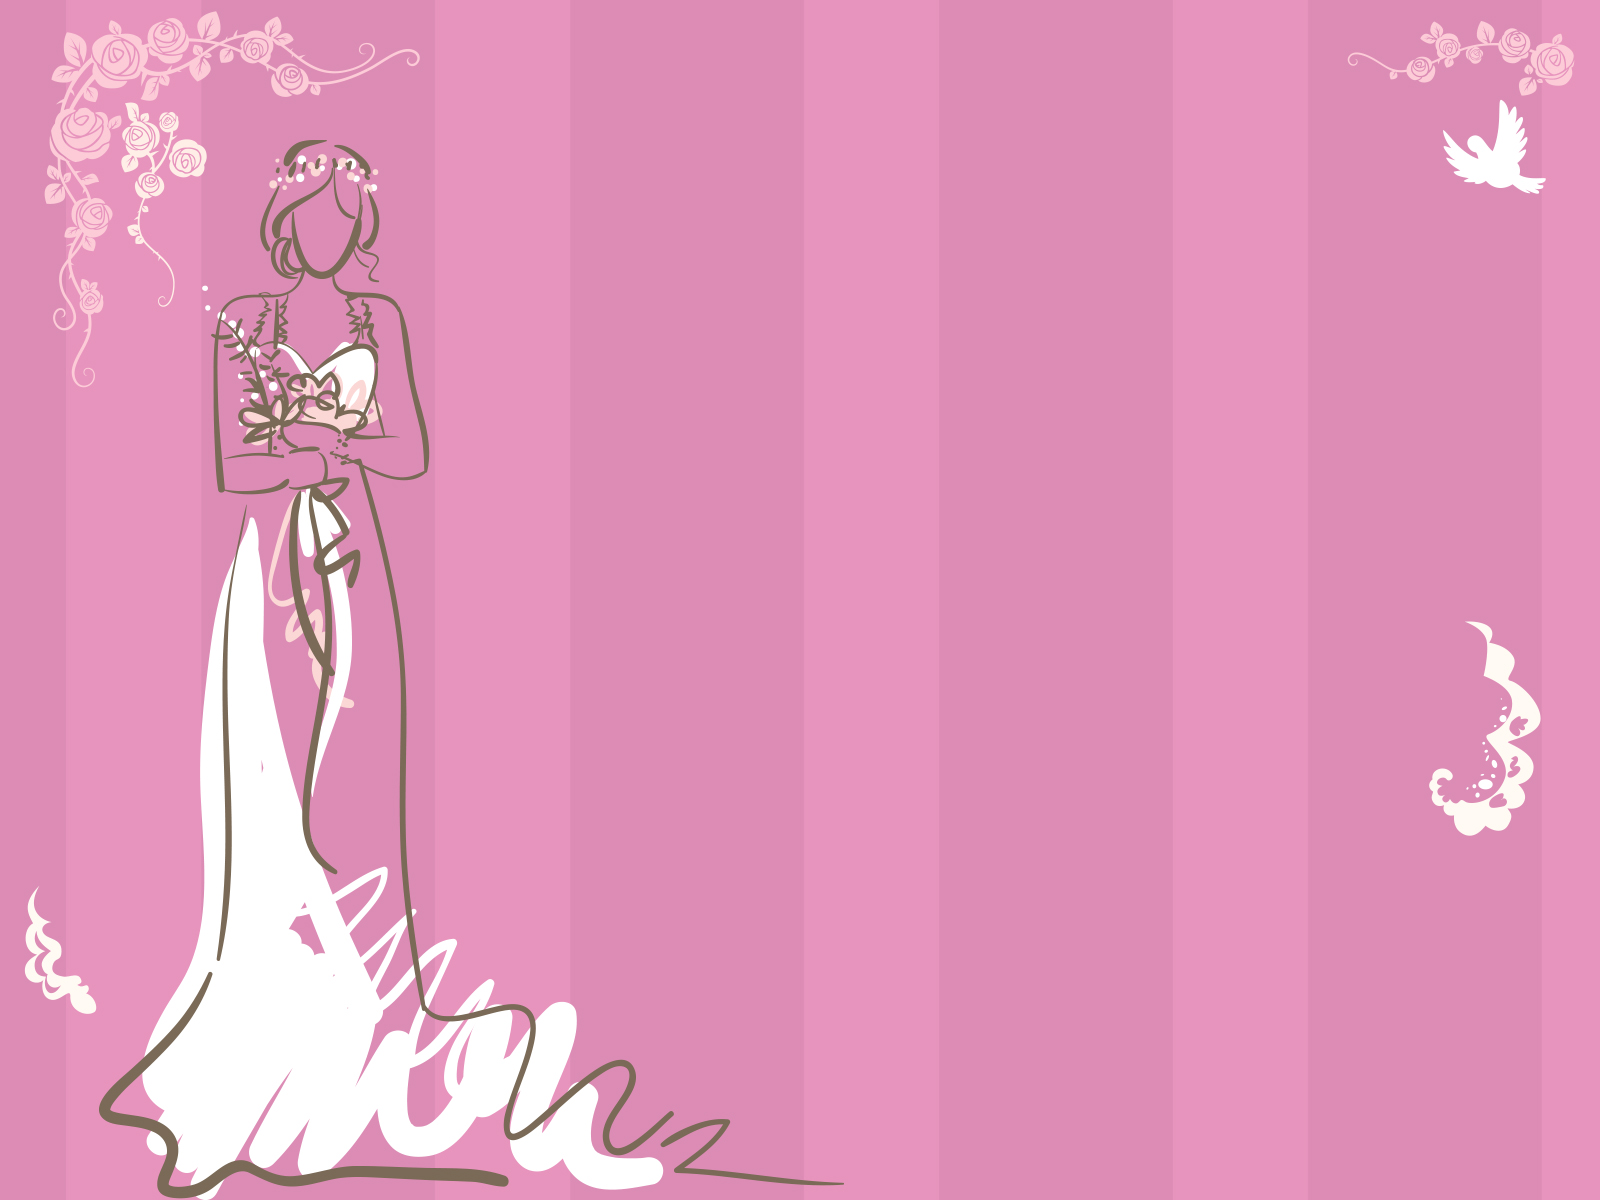 Beautiful Bride Powerpoint Templates - Beauty & Fashion, Fuchsia / Magenta  - Free PPT Backgrounds and Templates